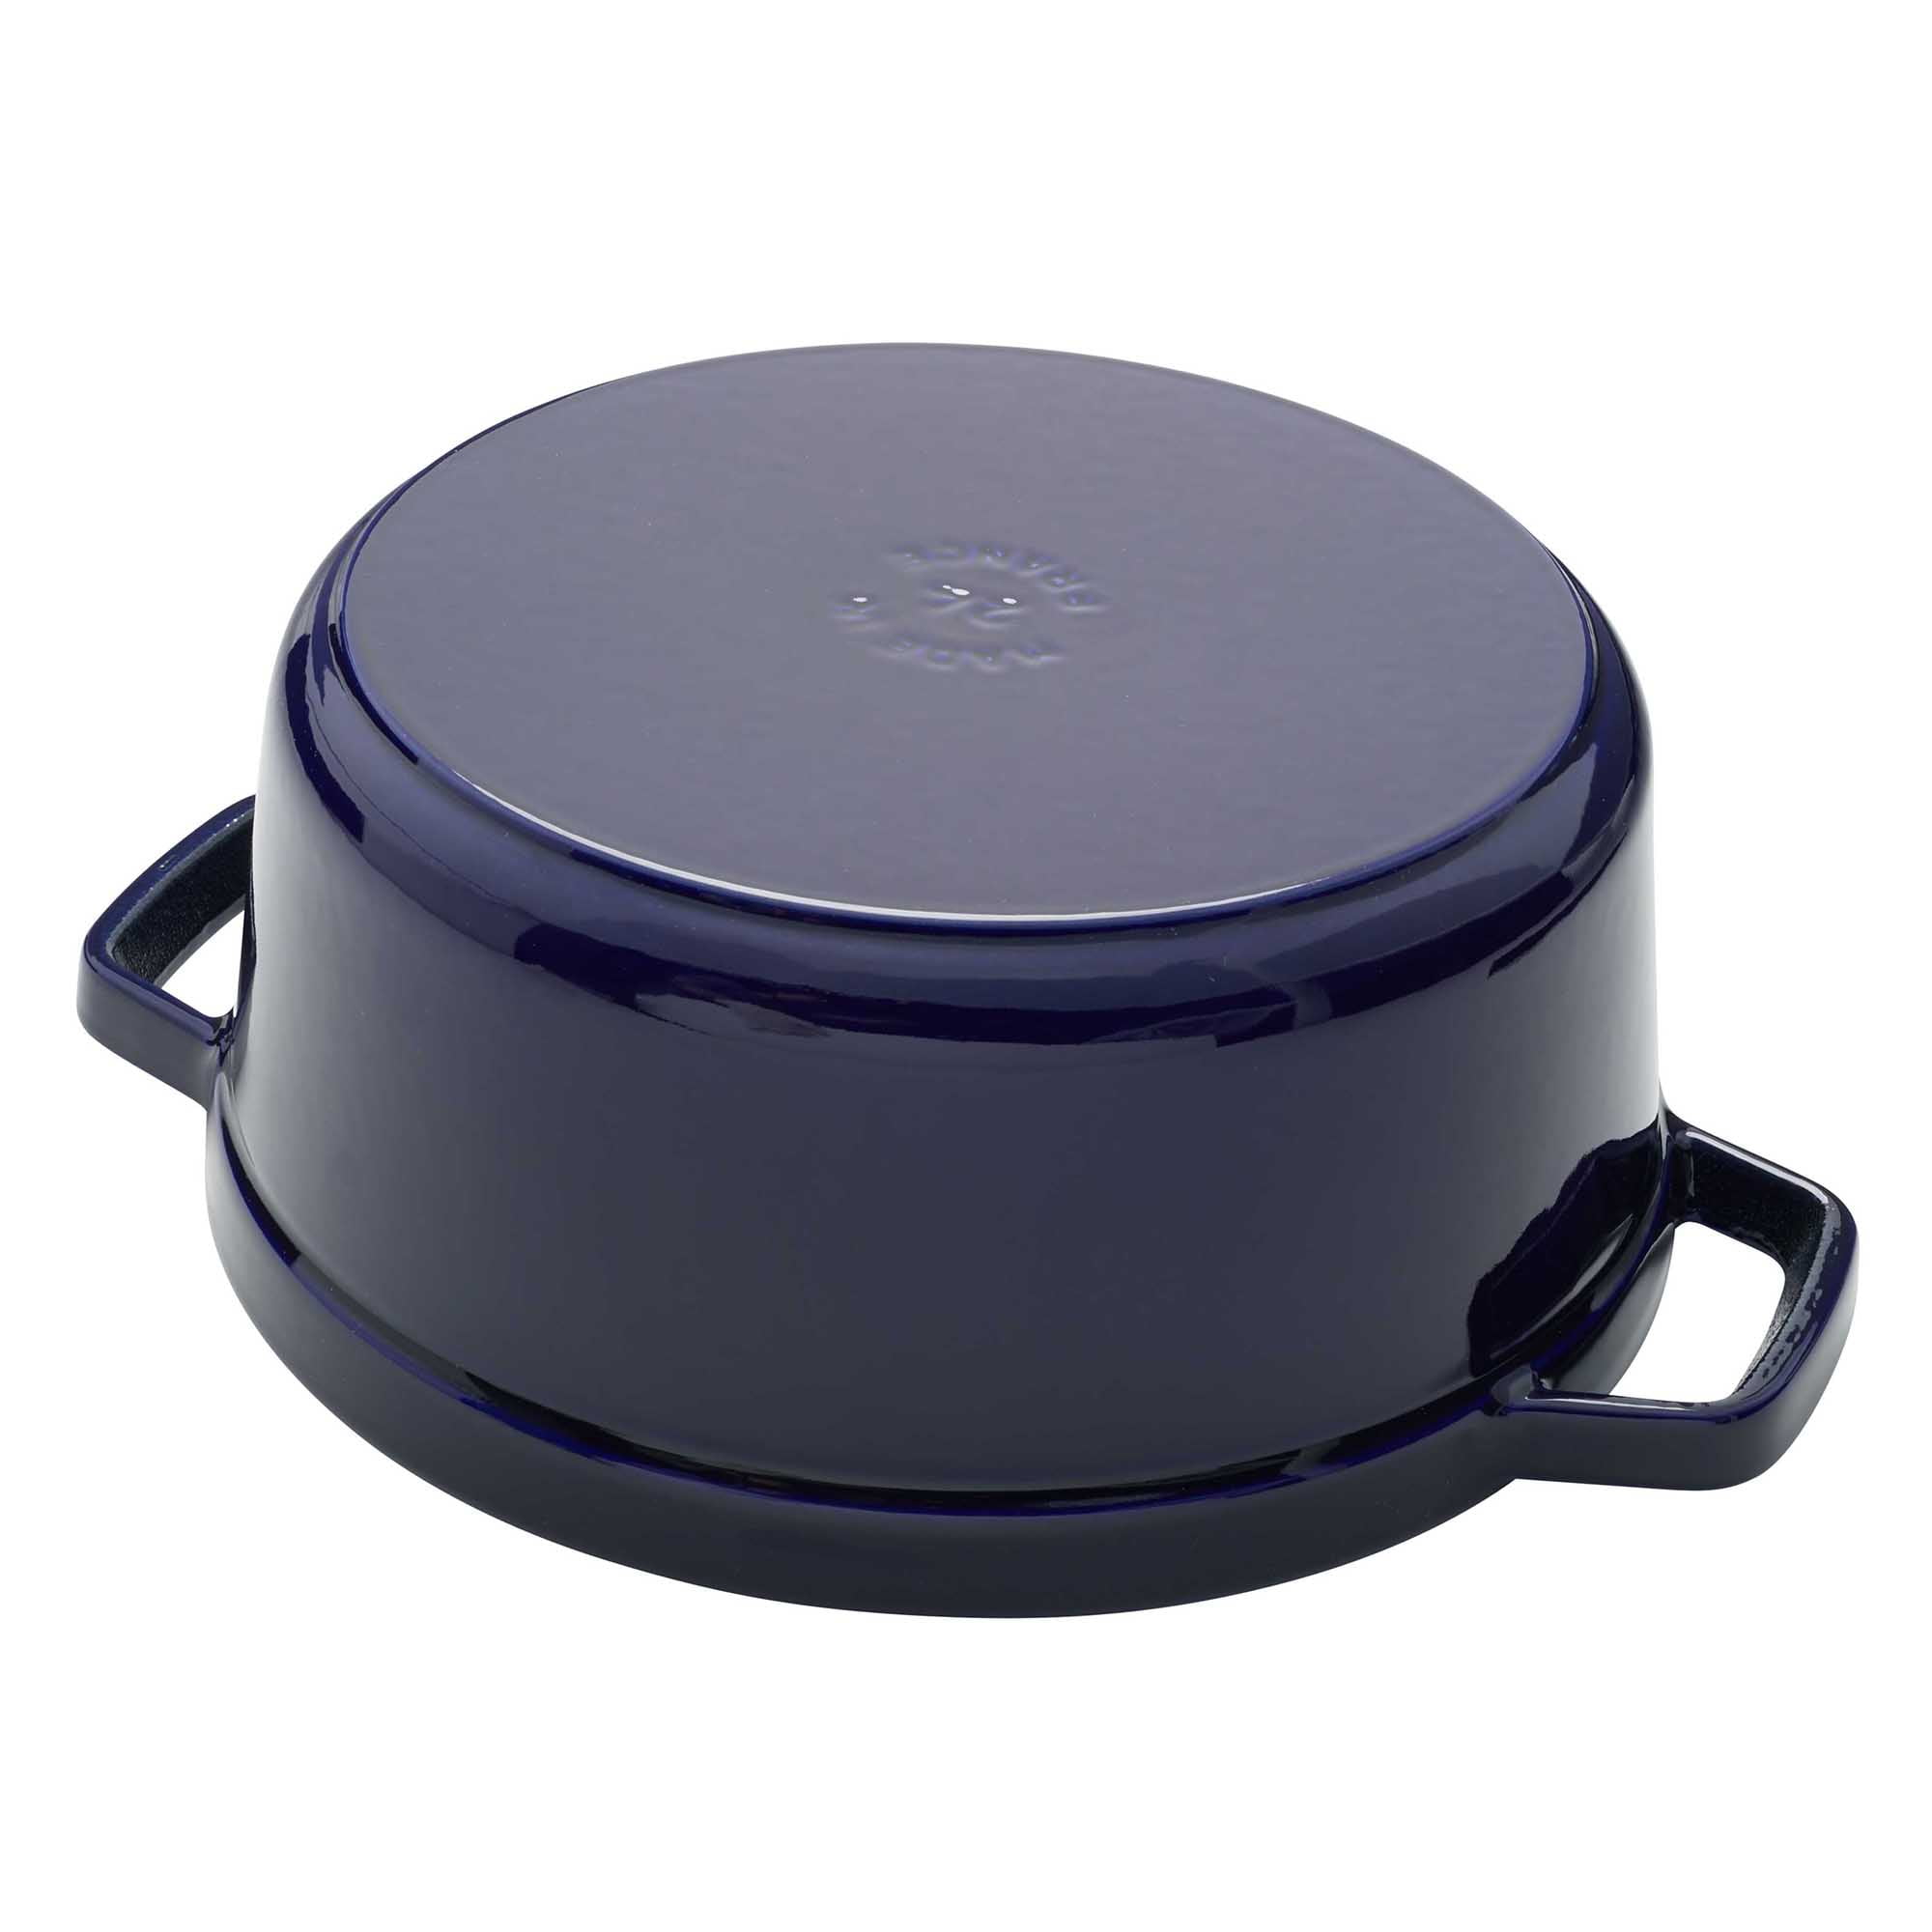 Staub Cast Iron 4-qt Round Cocotte with Glass Lid - Graphite Grey 